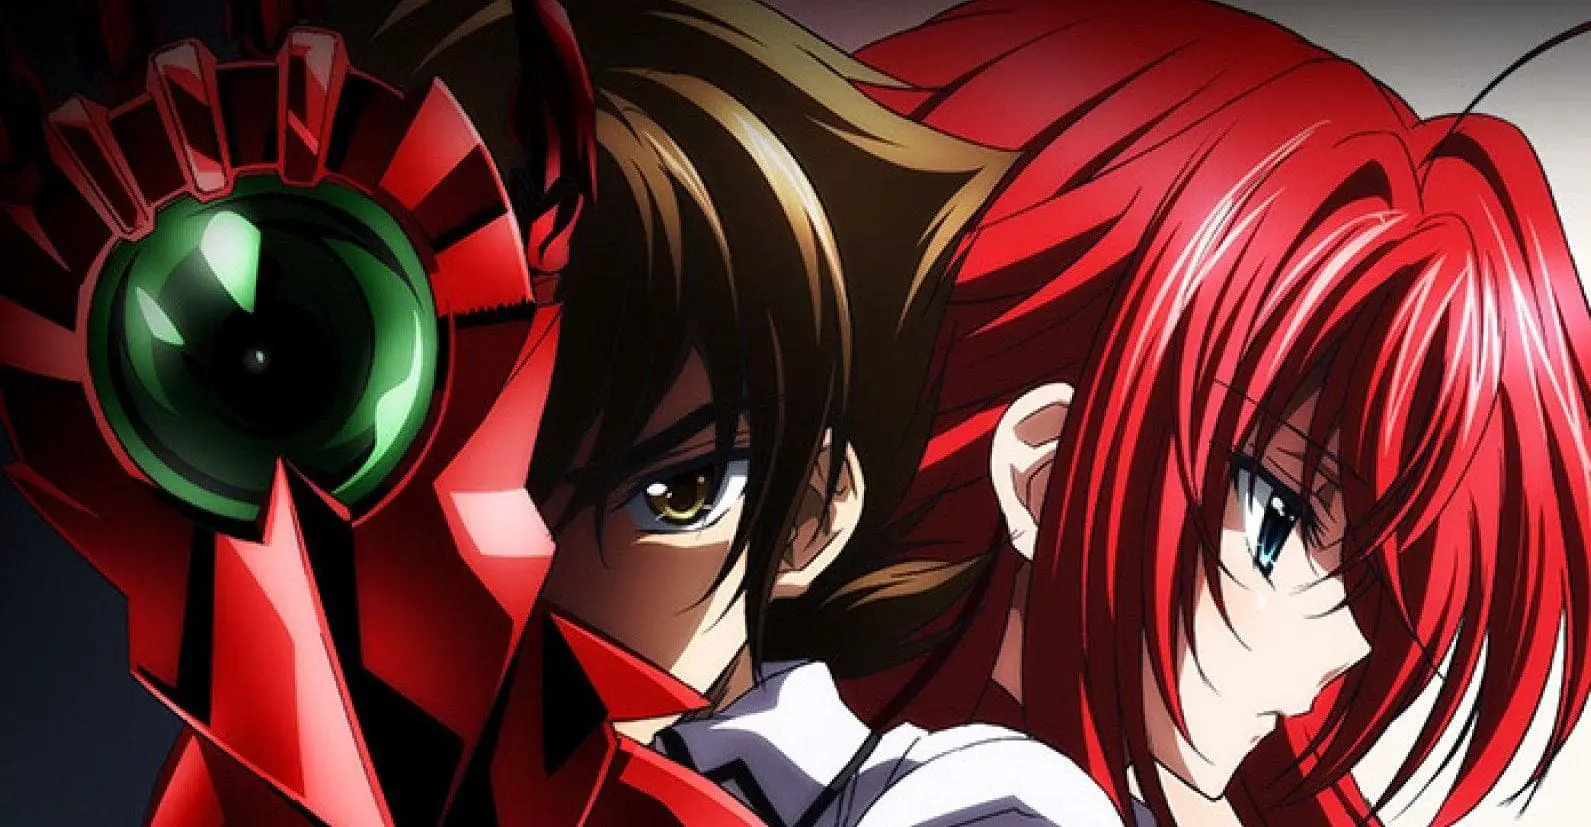 Highschool DXD's possible return? Will there be a Season 5? – J1 STUDIOS